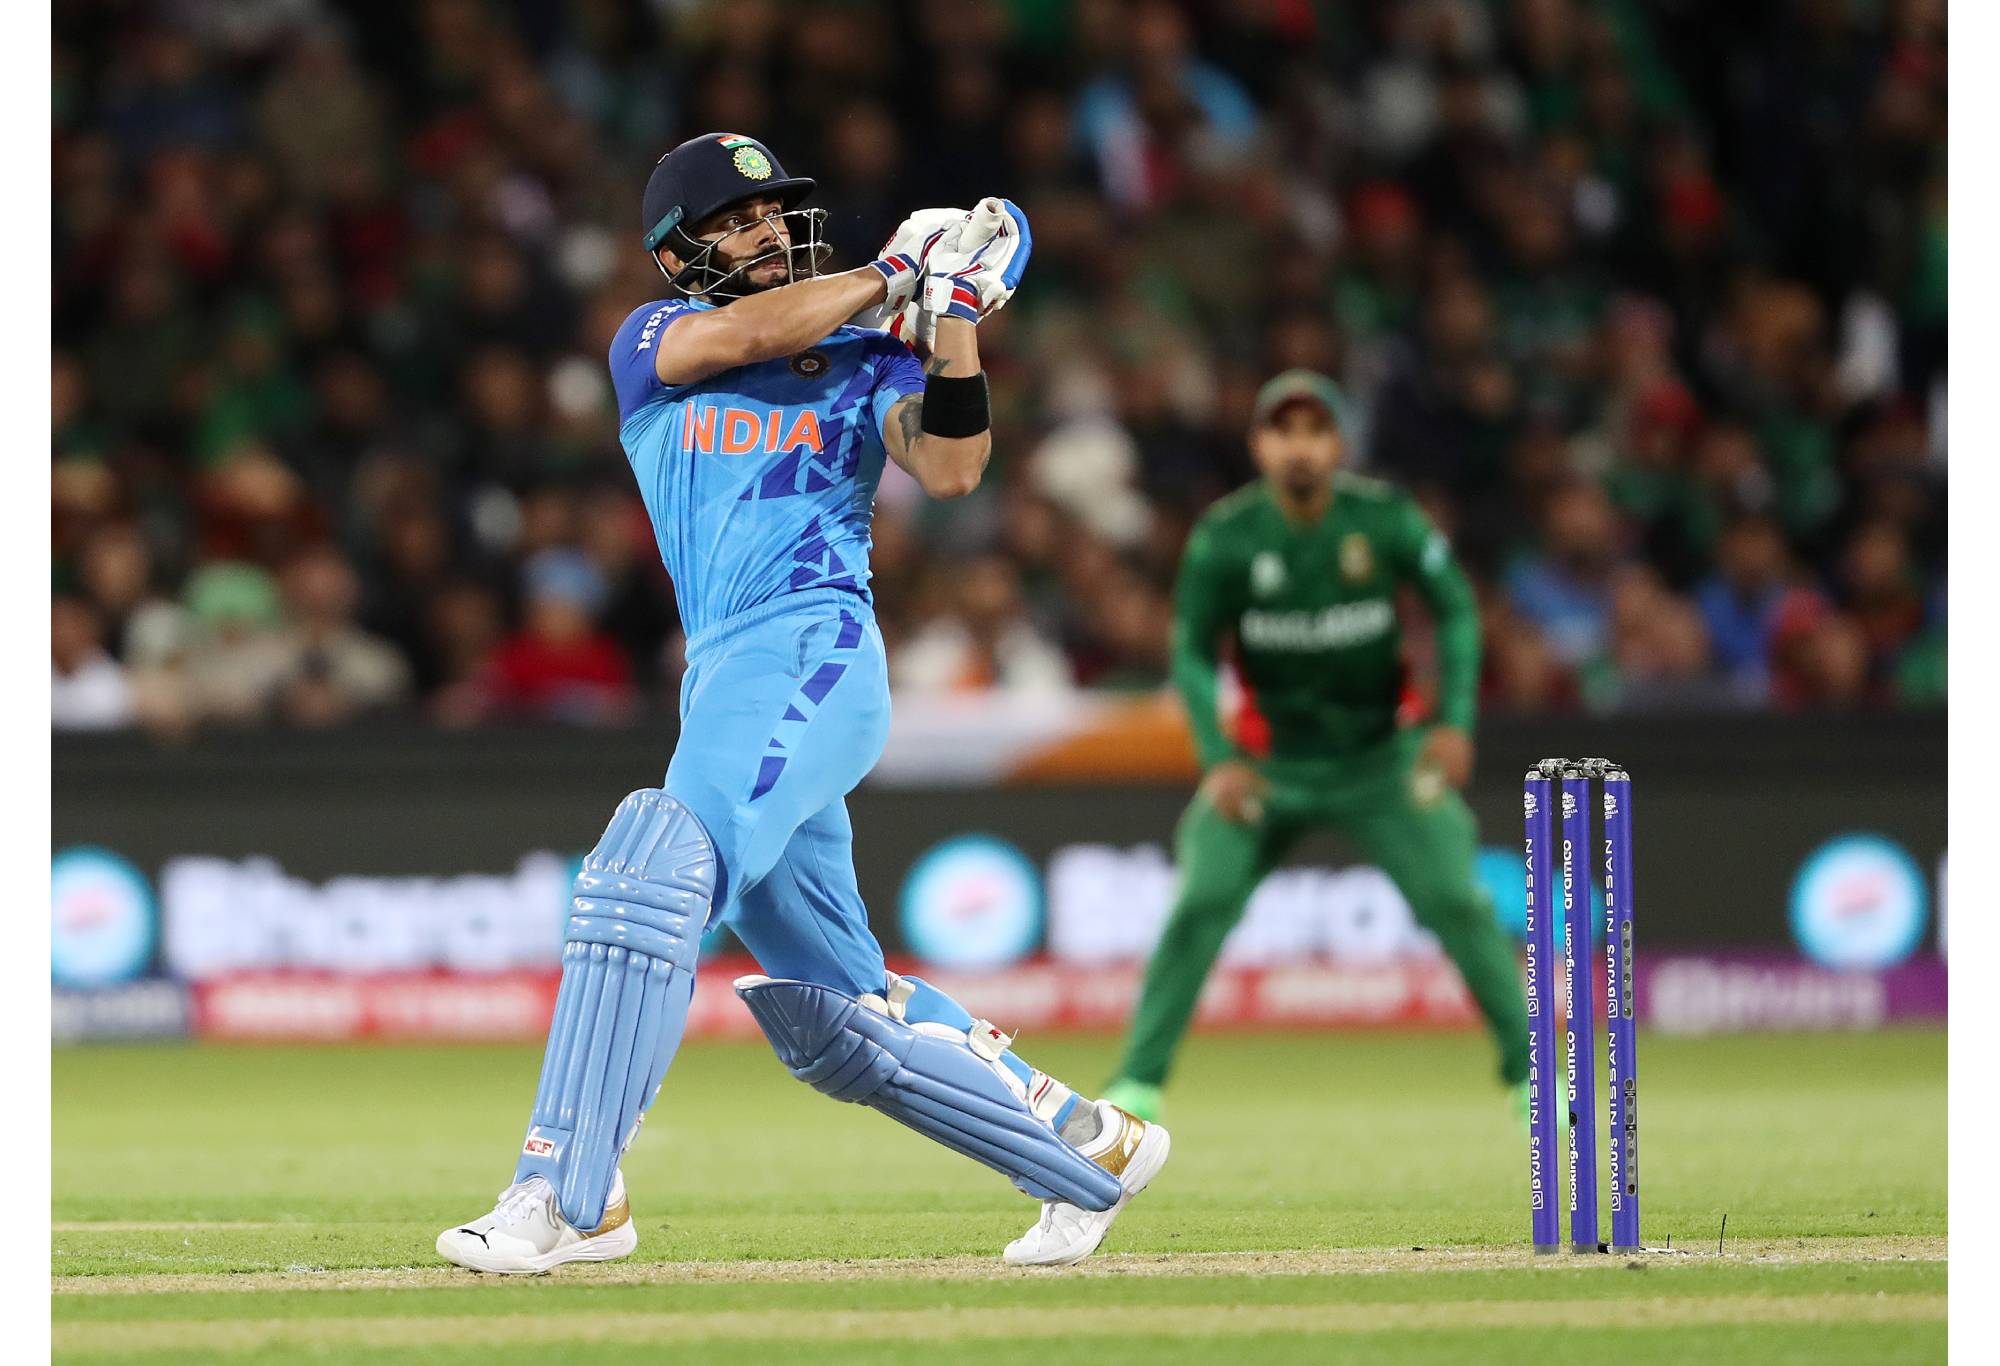 ADELAIDE, AUSTRALIA - NOVEMBER 02: Virat Kohli of India during the ICC Men's T20 World Cup match between India and Bangladesh at Adelaide Oval on November 02, 2022 in Adelaide, Australia. (Photo by Sarah Reed/Getty Images)